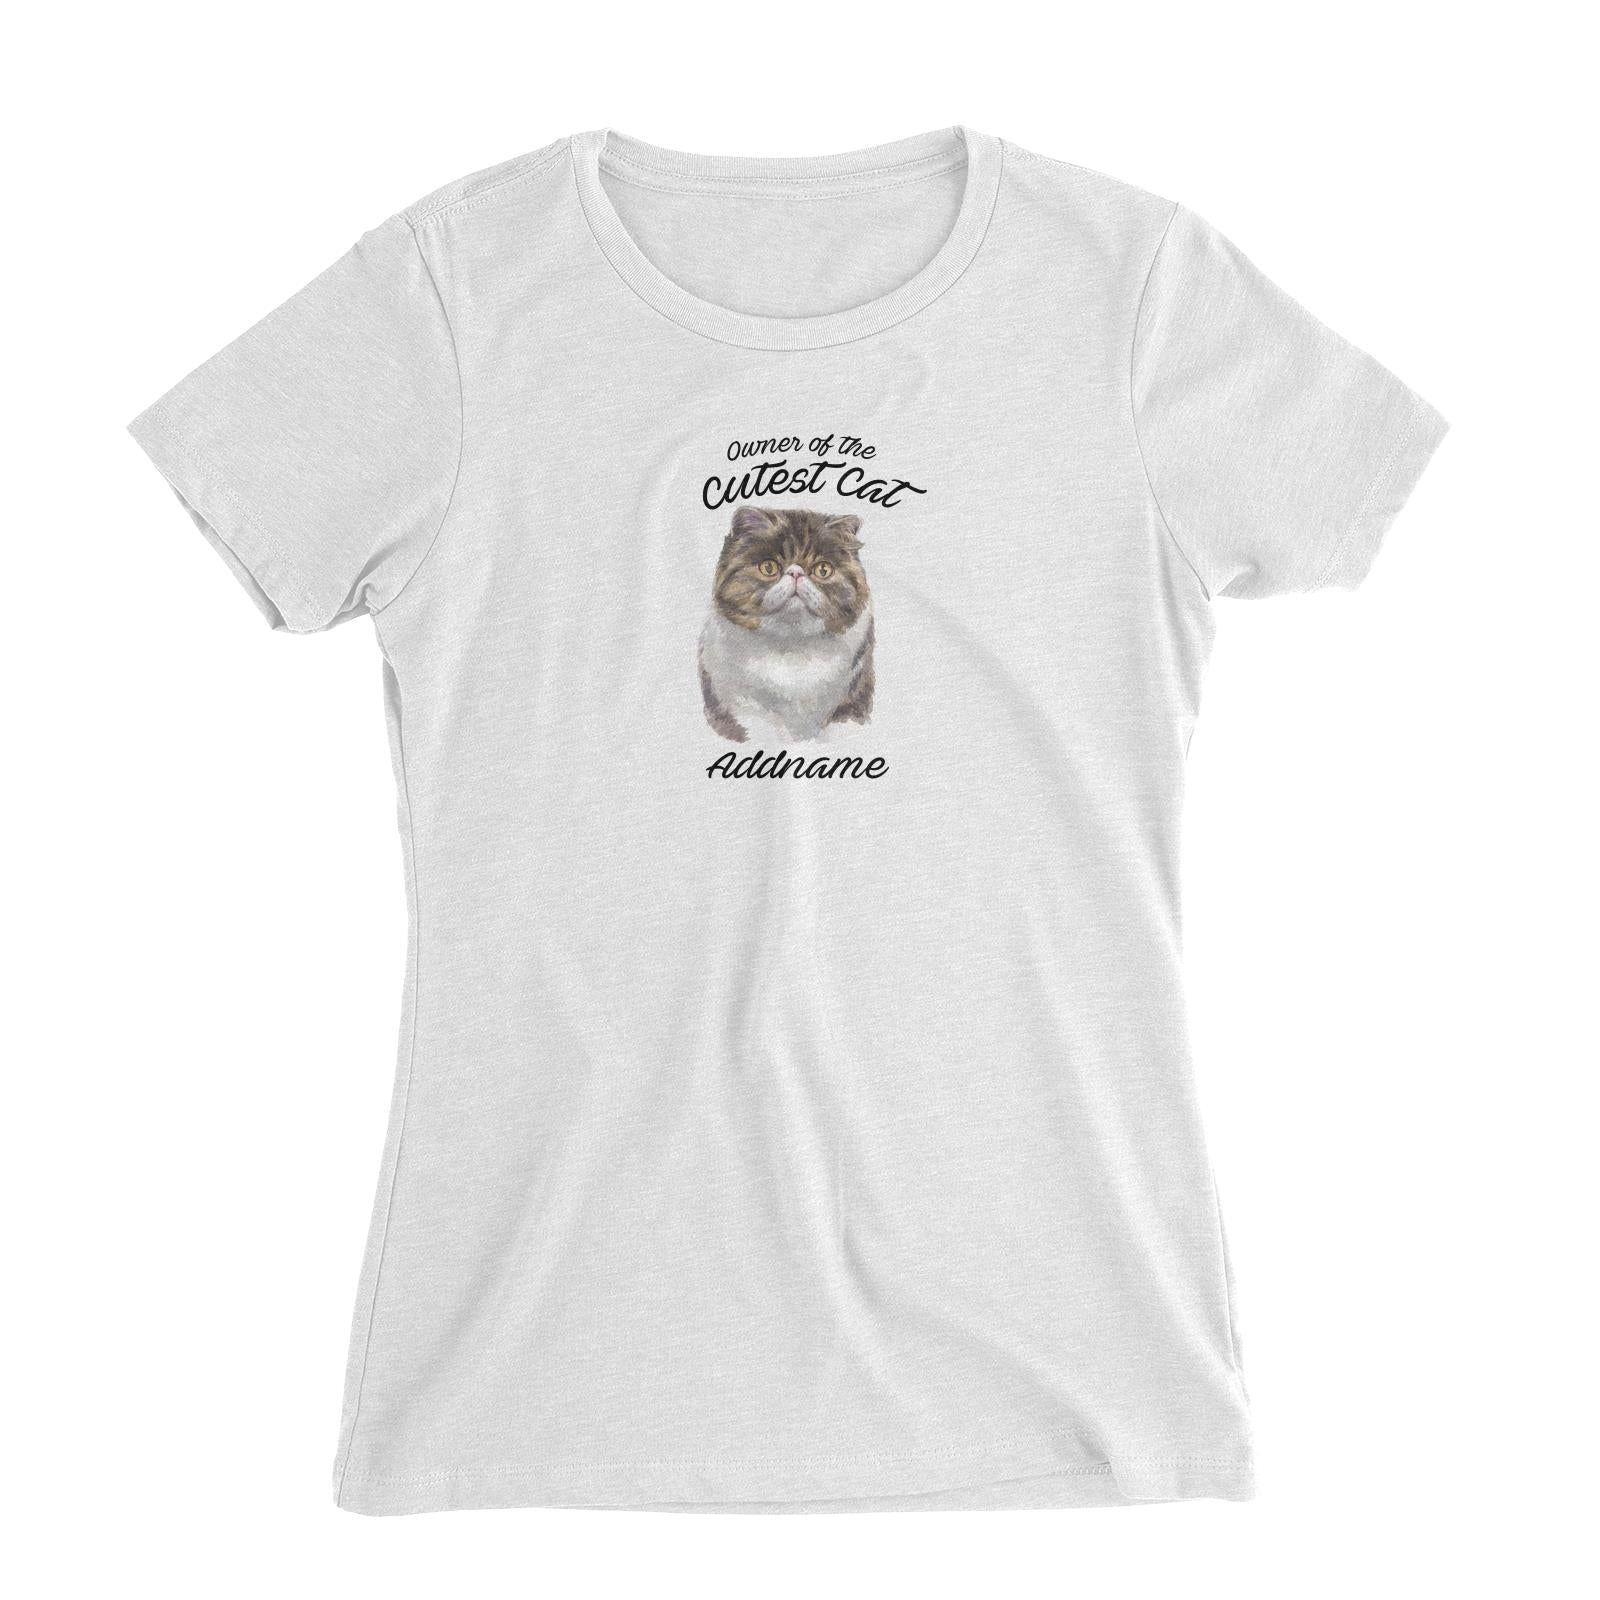 Watercolor Owner Of The Cutest Cat Exotic Shorthair Addname Women's Slim Fit T-Shirt